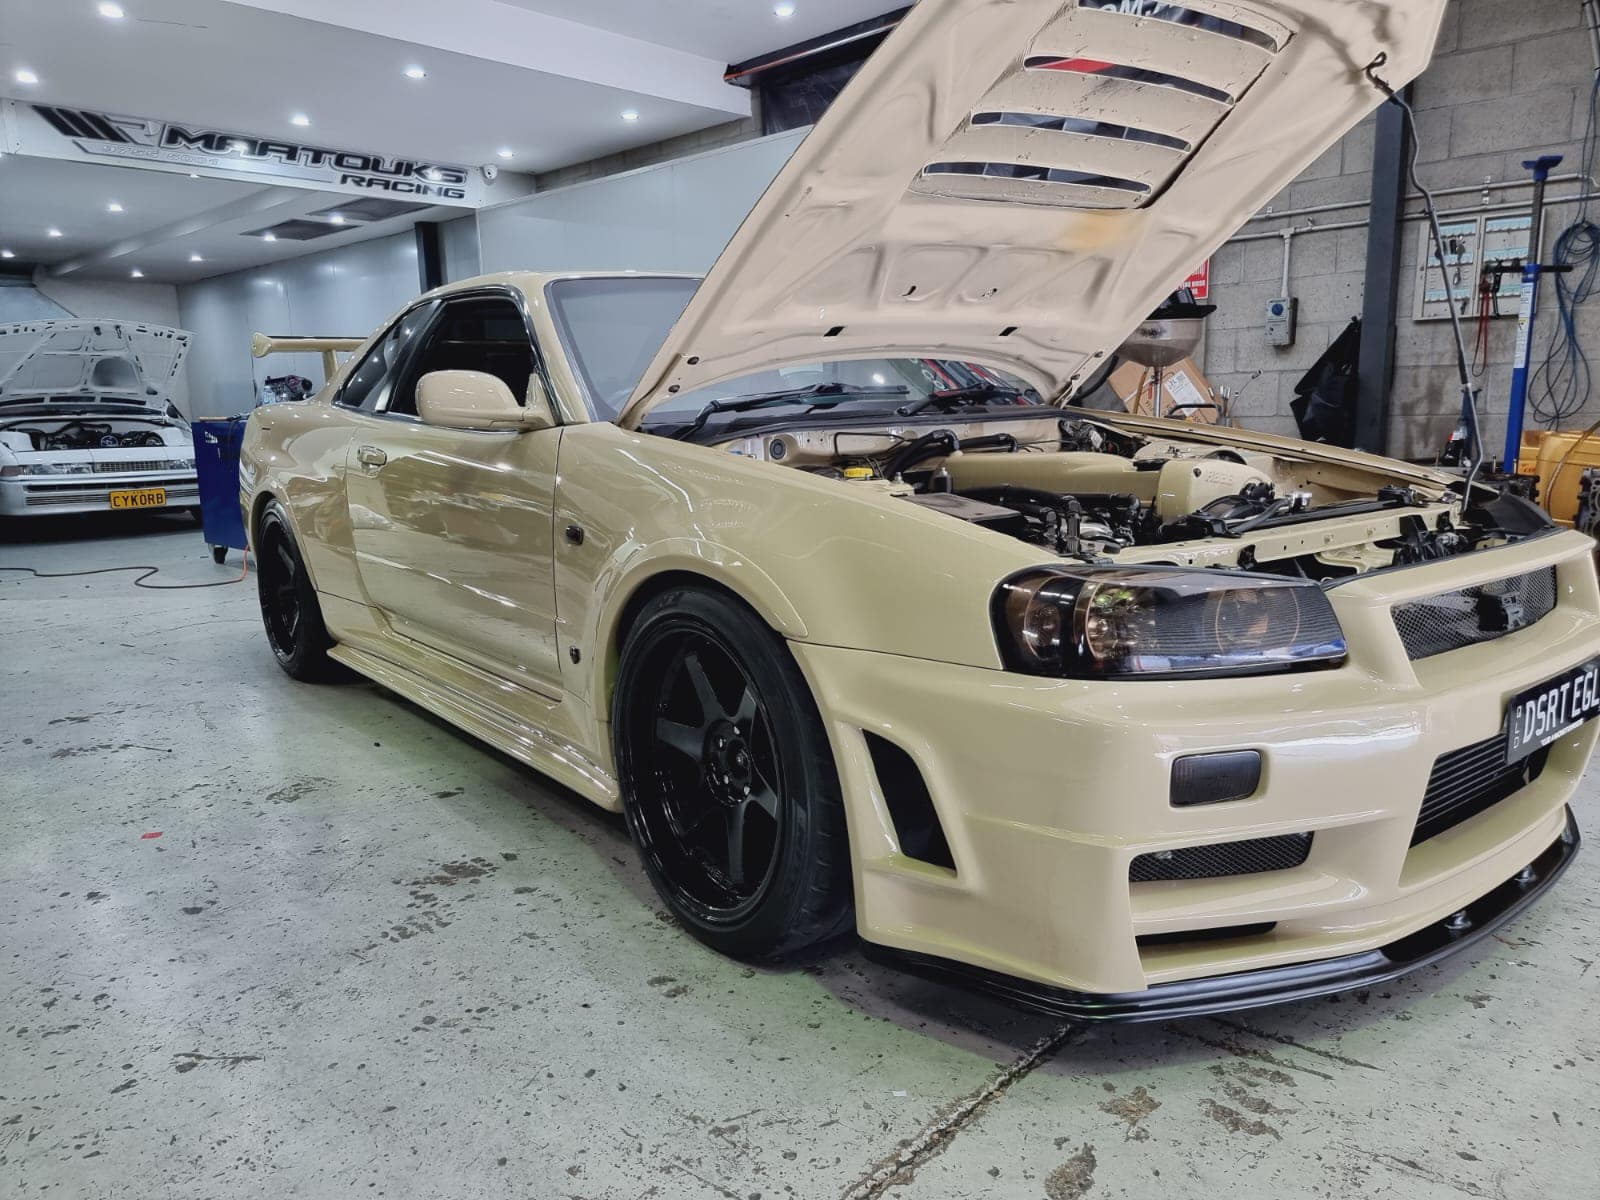 Tan Colored Nissan Skyline R34 Gt R With 1 150 Hp Would Look Right At Home In A Desert Carscoops